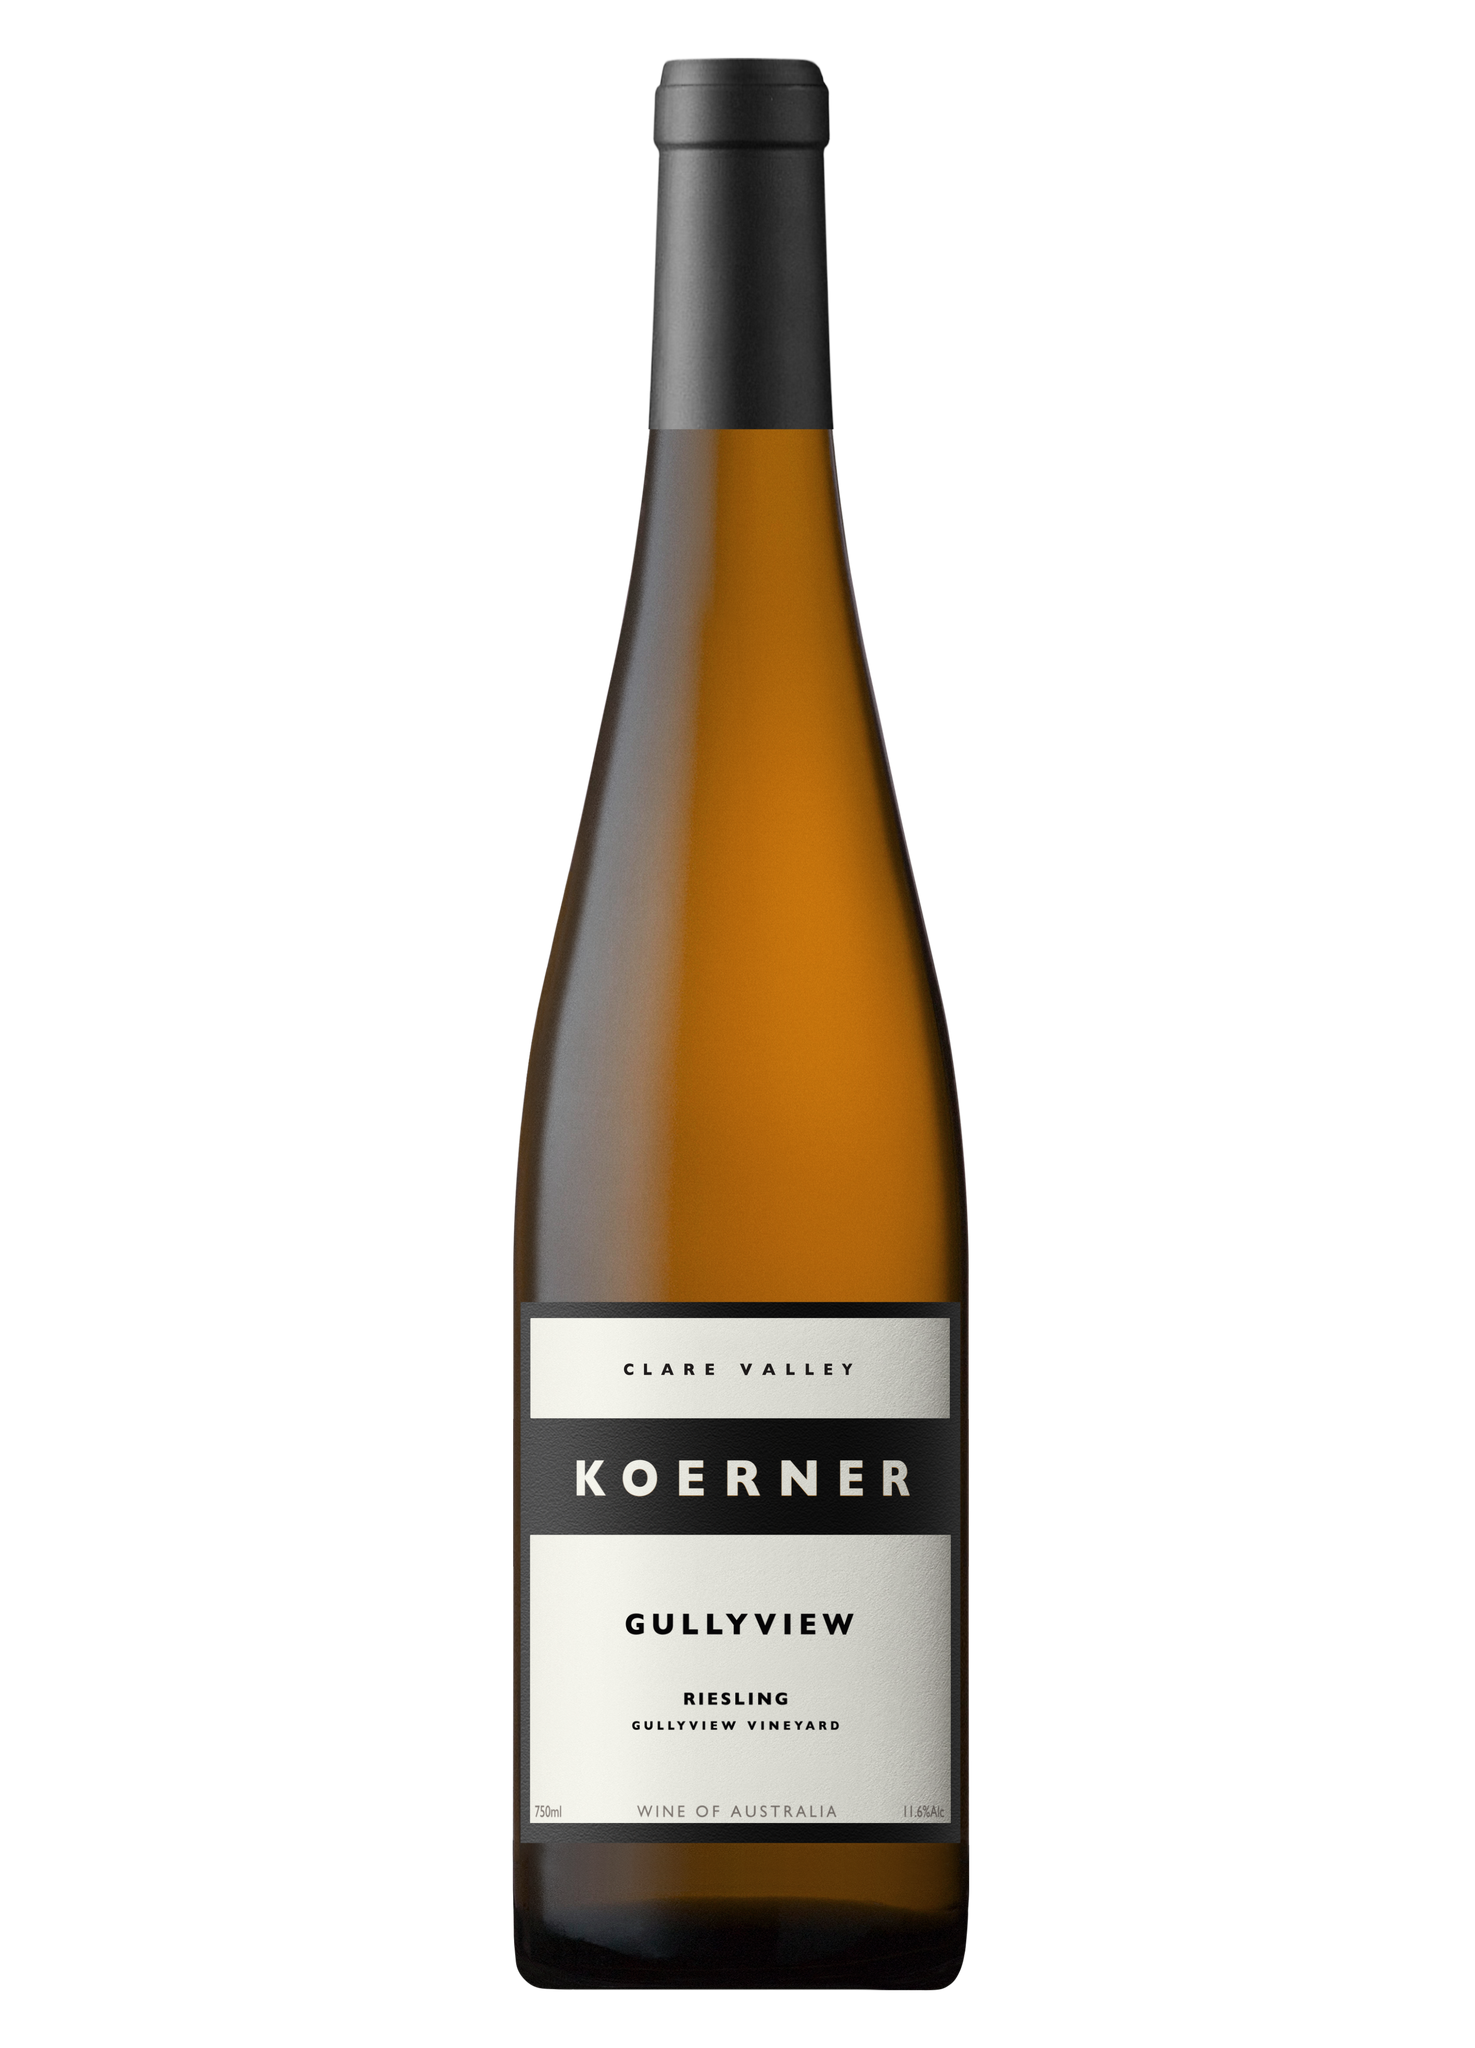 2022 Koerner Gullyview Riesling- 96 points - Mike Bennie review (The WINEFRONT)